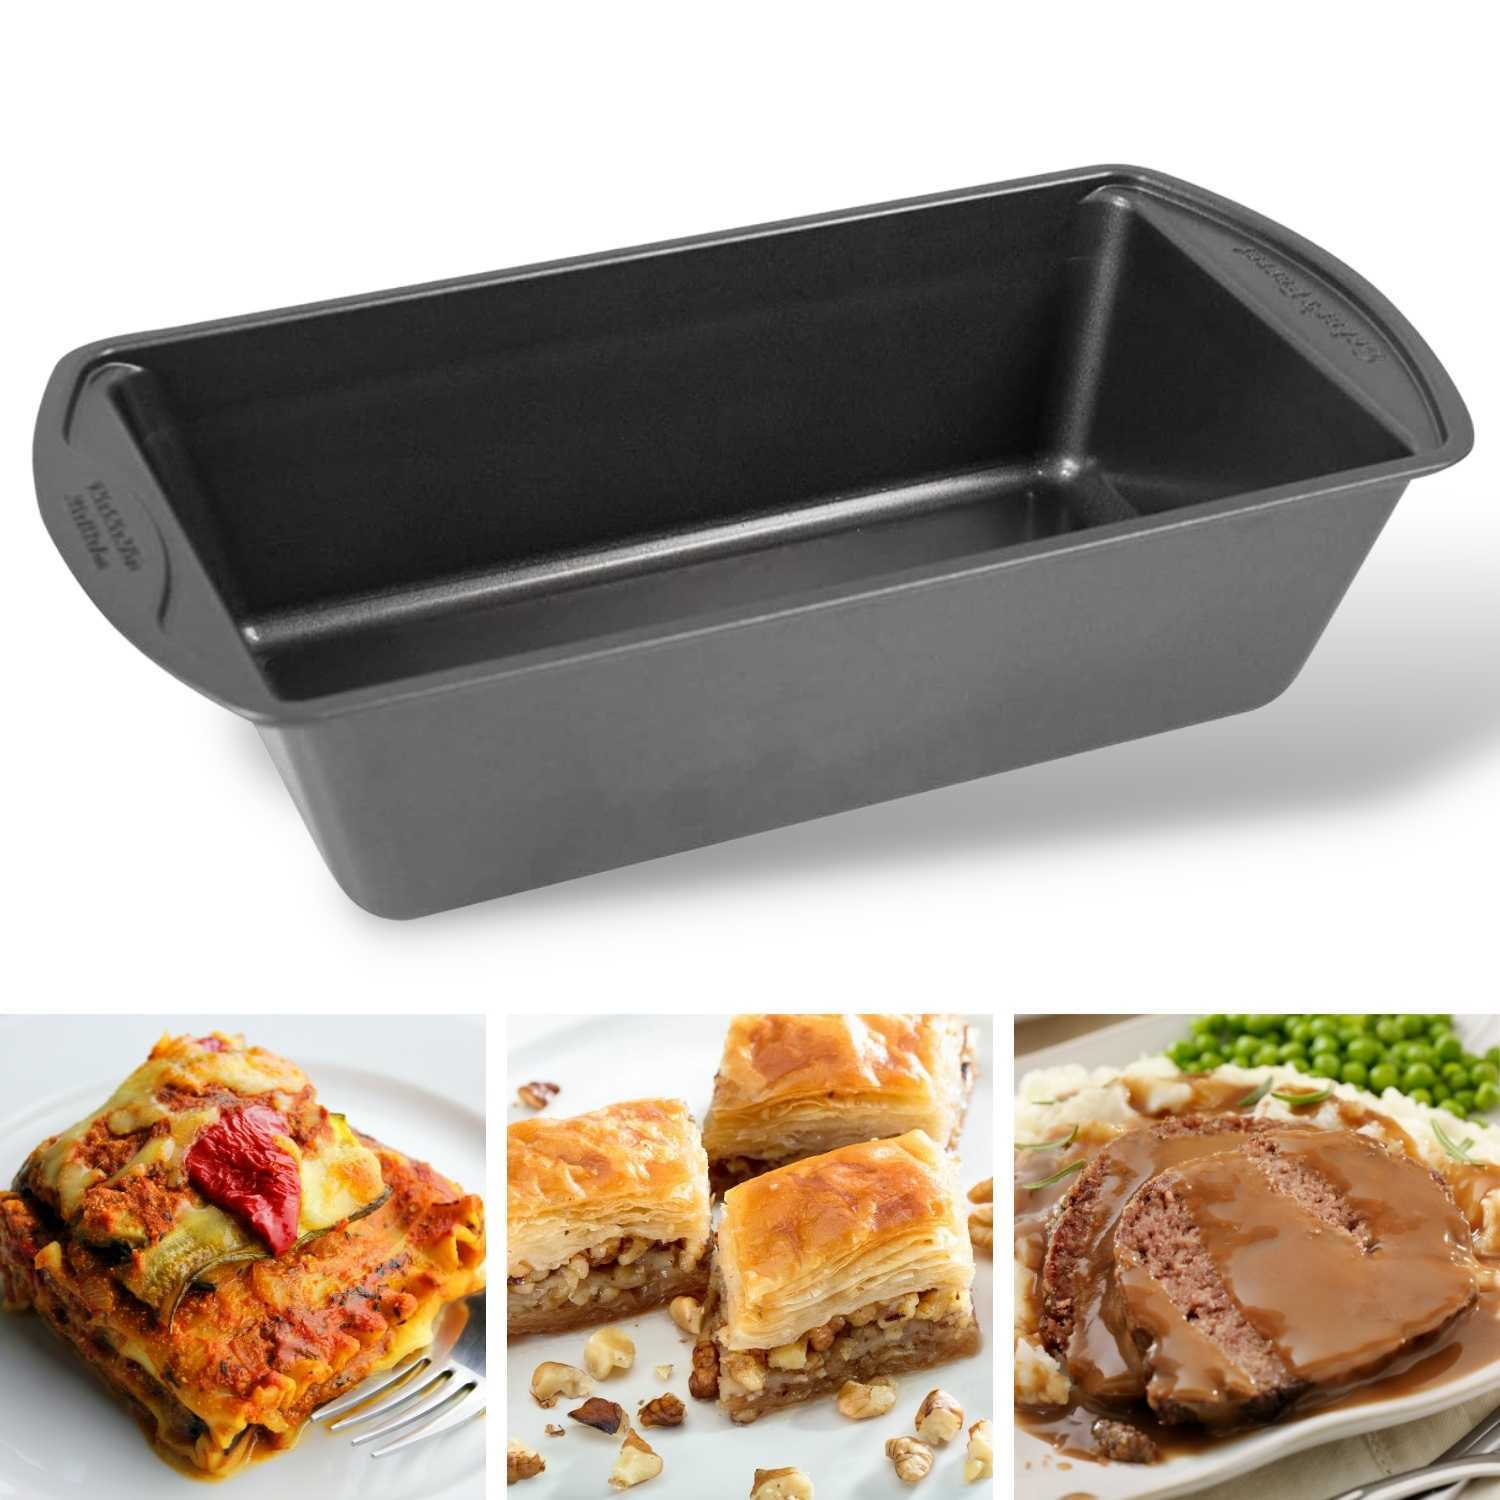 New Crofton Collapsable Silicone non-stick Baking Bread Loaf pan Cw